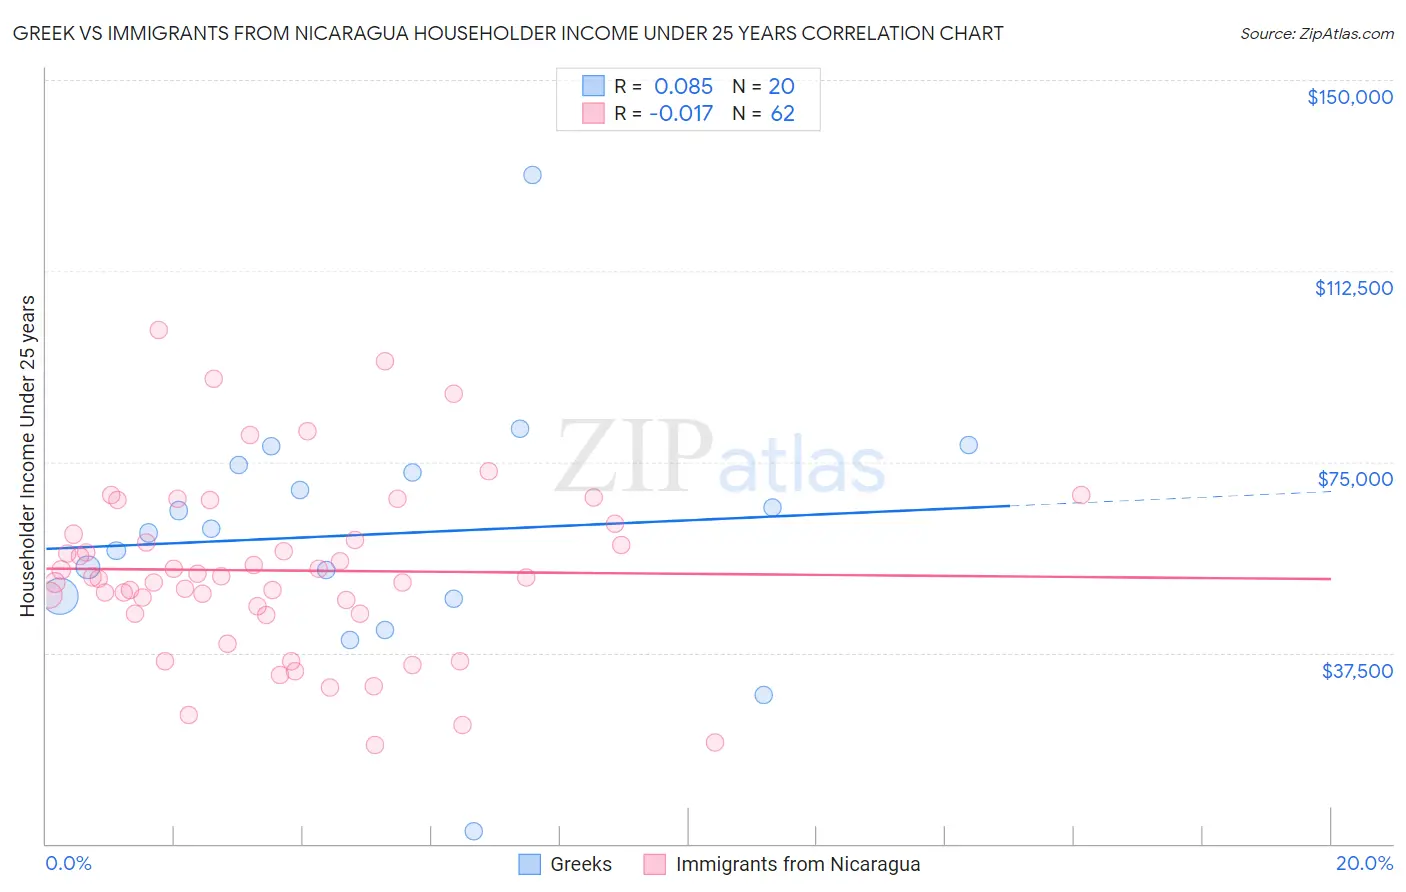 Greek vs Immigrants from Nicaragua Householder Income Under 25 years